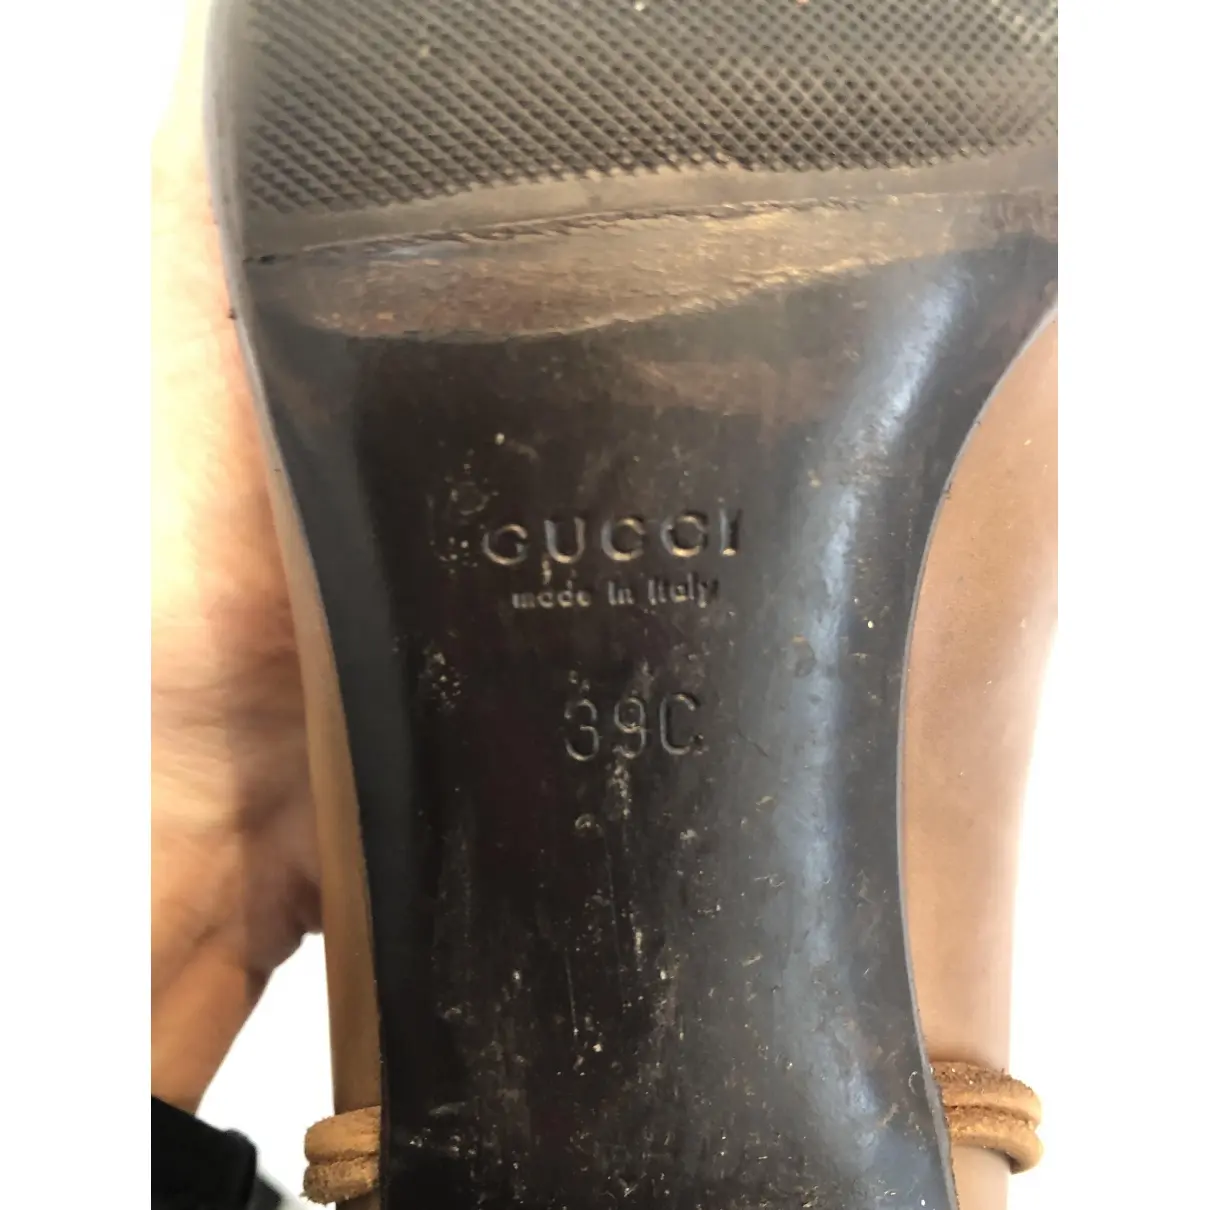 Leather boots Gucci - Vintage